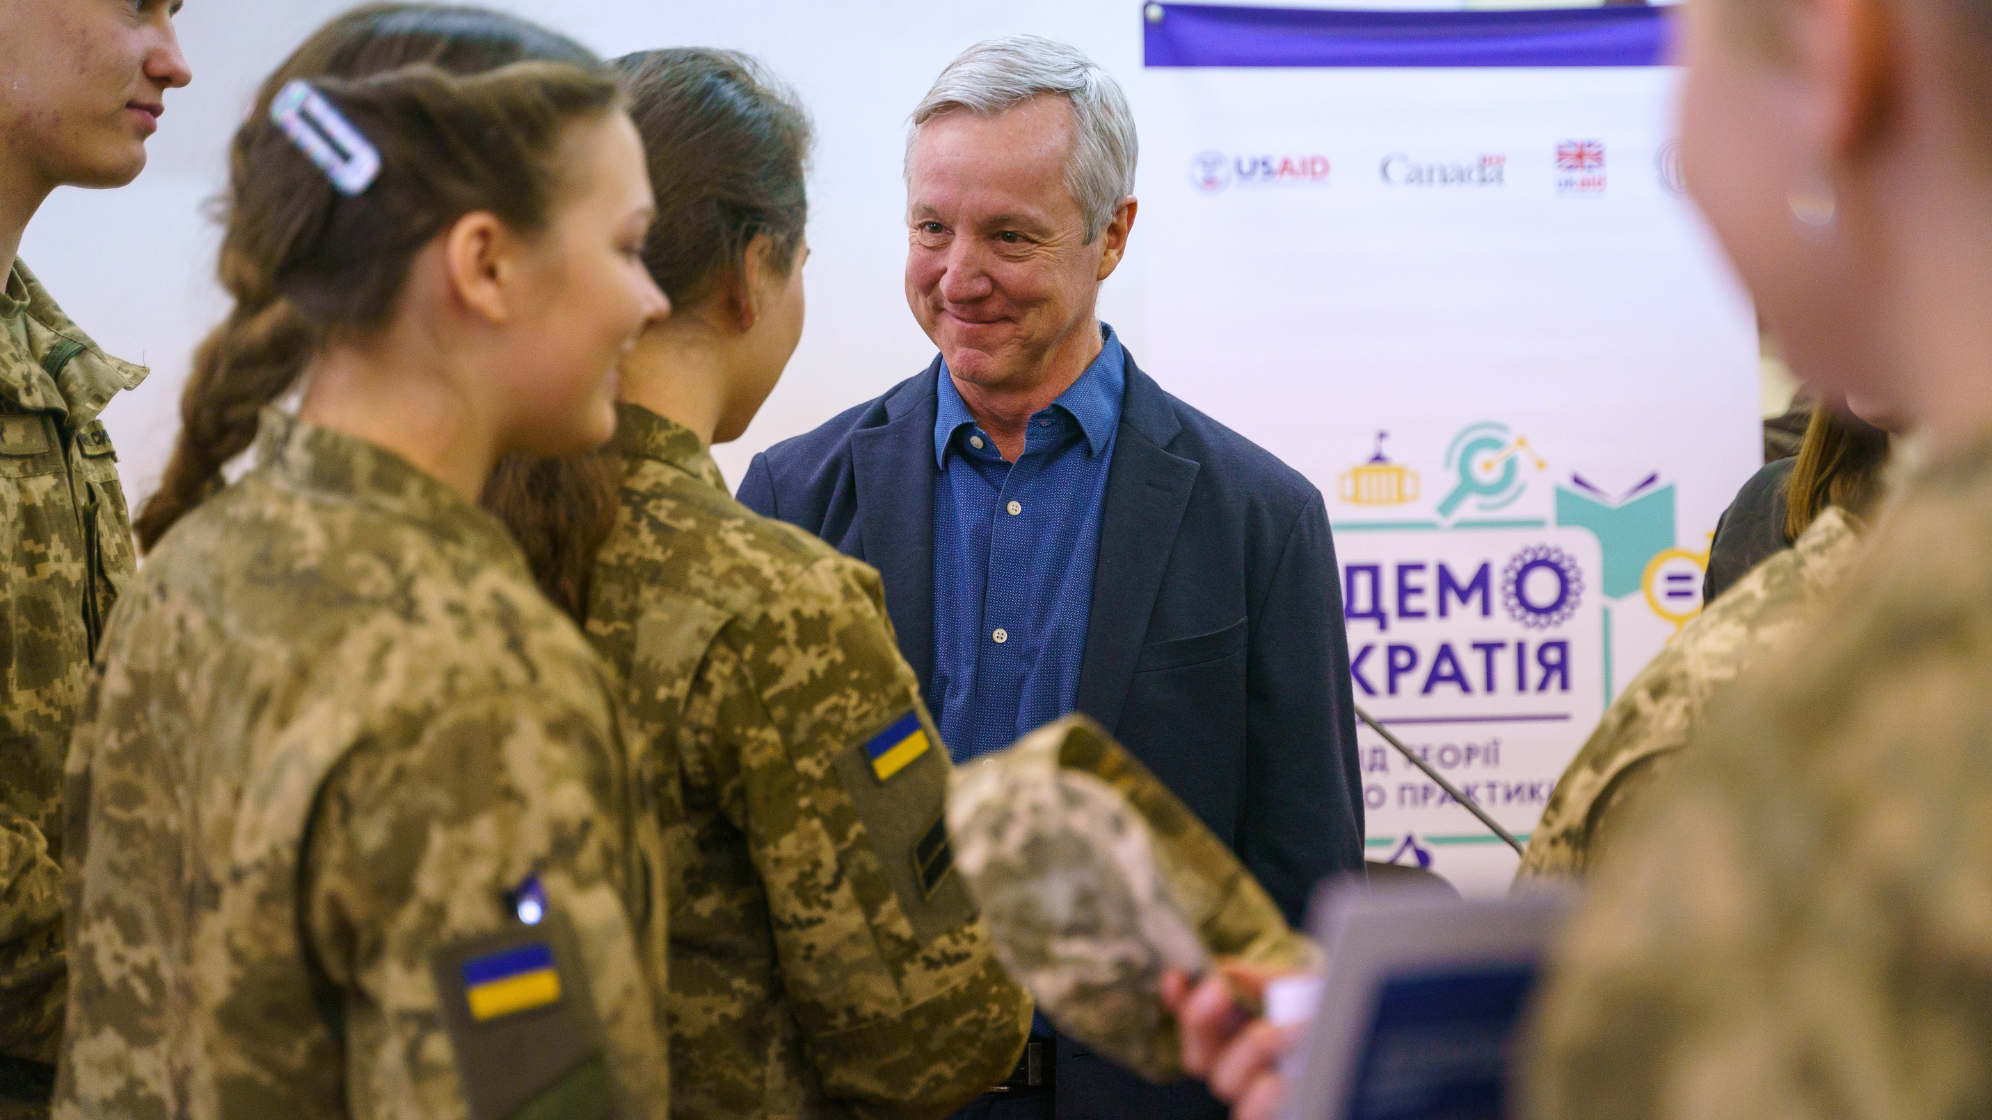 Tony Banbury meets with student soldiers in Ukraine